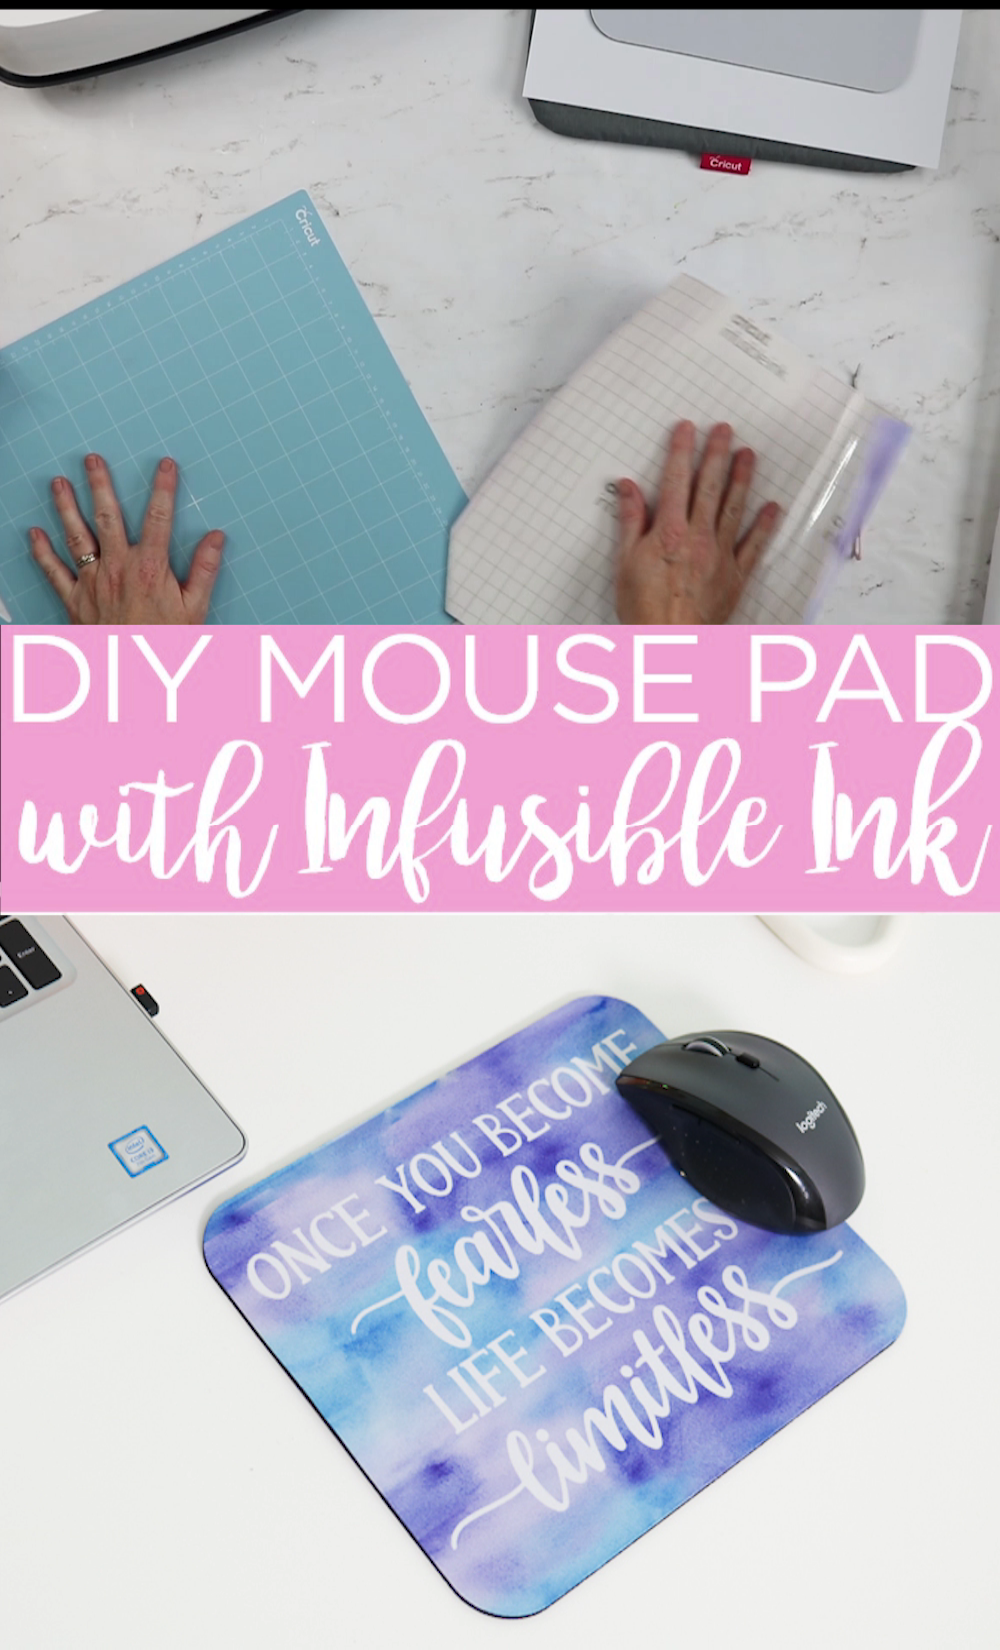 DIY Mouse Pad with Cricut Infusible Ink - DIY Mouse Pad with Cricut Infusible Ink -   16 useful diy For Teens ideas